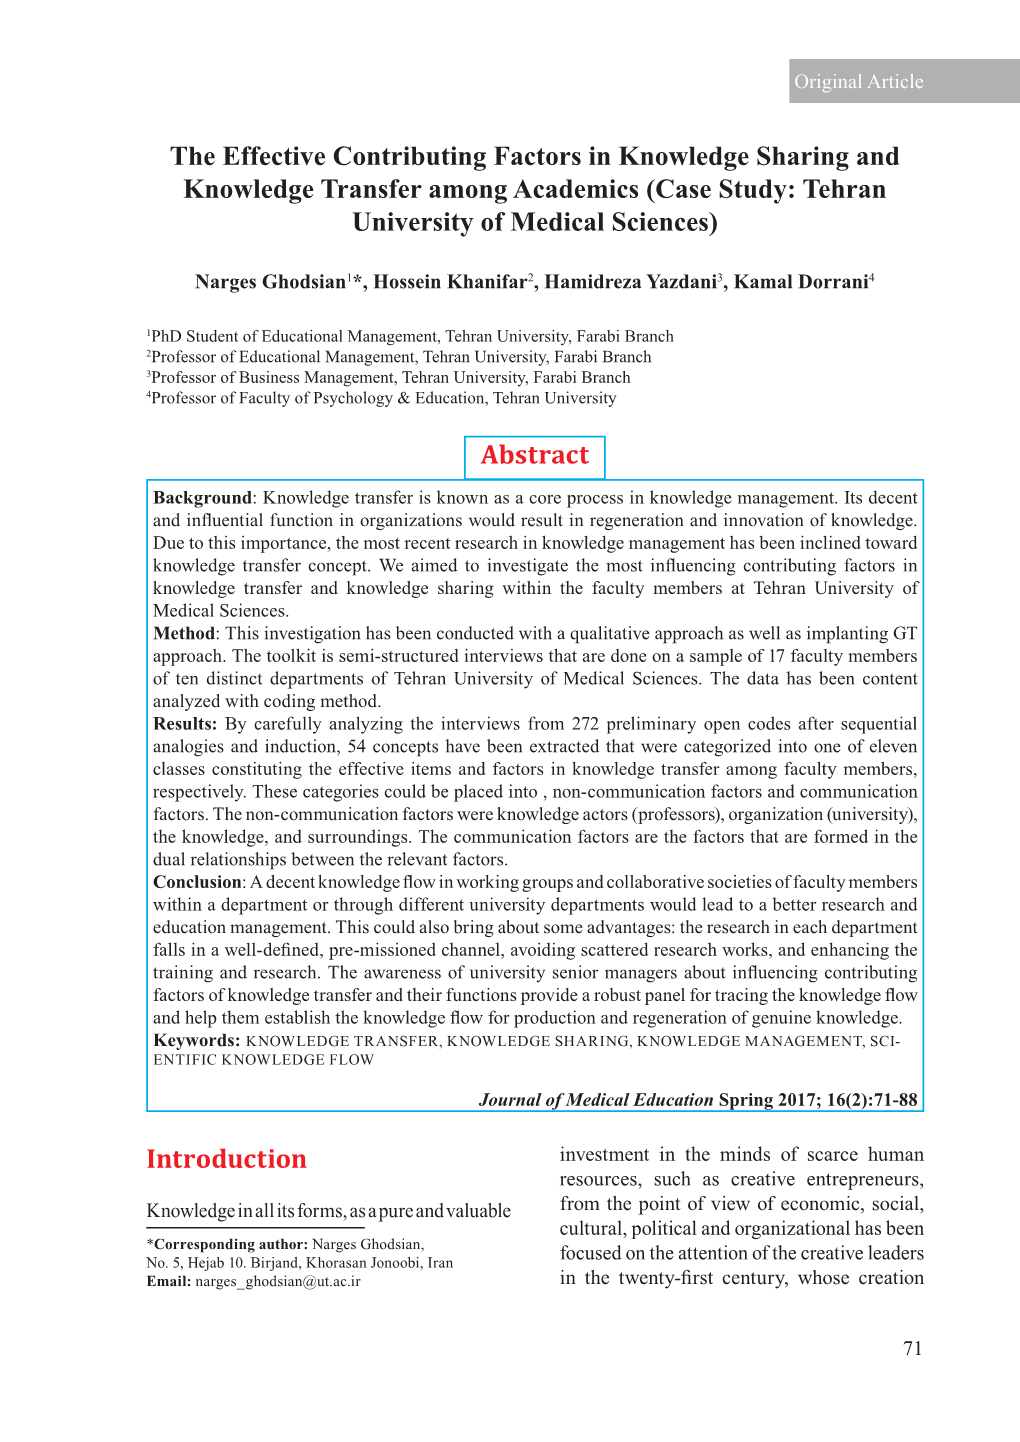 The Effective Contributing Factors in Knowledge Sharing and Knowledge Transfer Among Academics (Case Study: Tehran University of Medical Sciences)